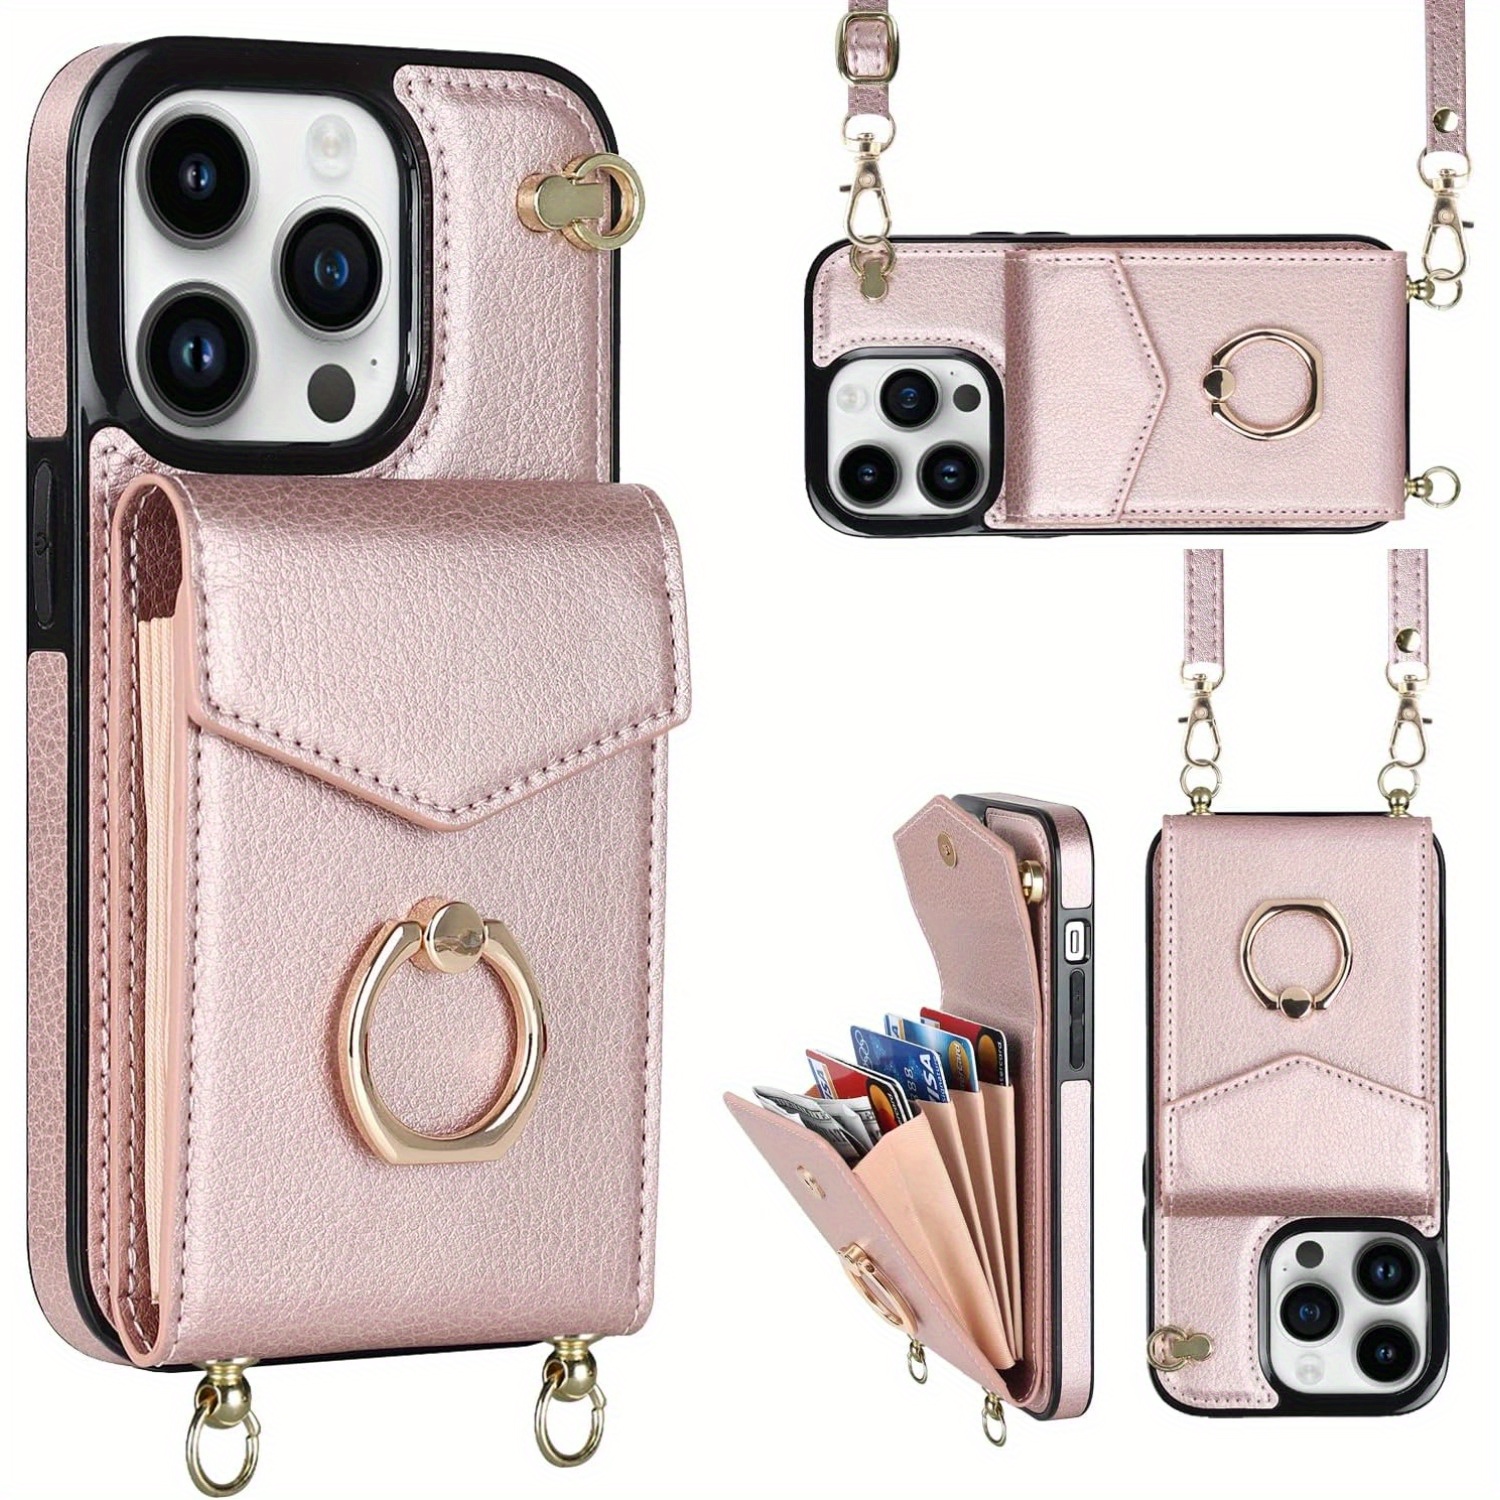 

For Iphone 13/13pro/13promax/13mini, Minimalist Wallet Case With Ring Kickstand And Shoulder Strap, Shockproof Stylish Protective Cover For Iphone